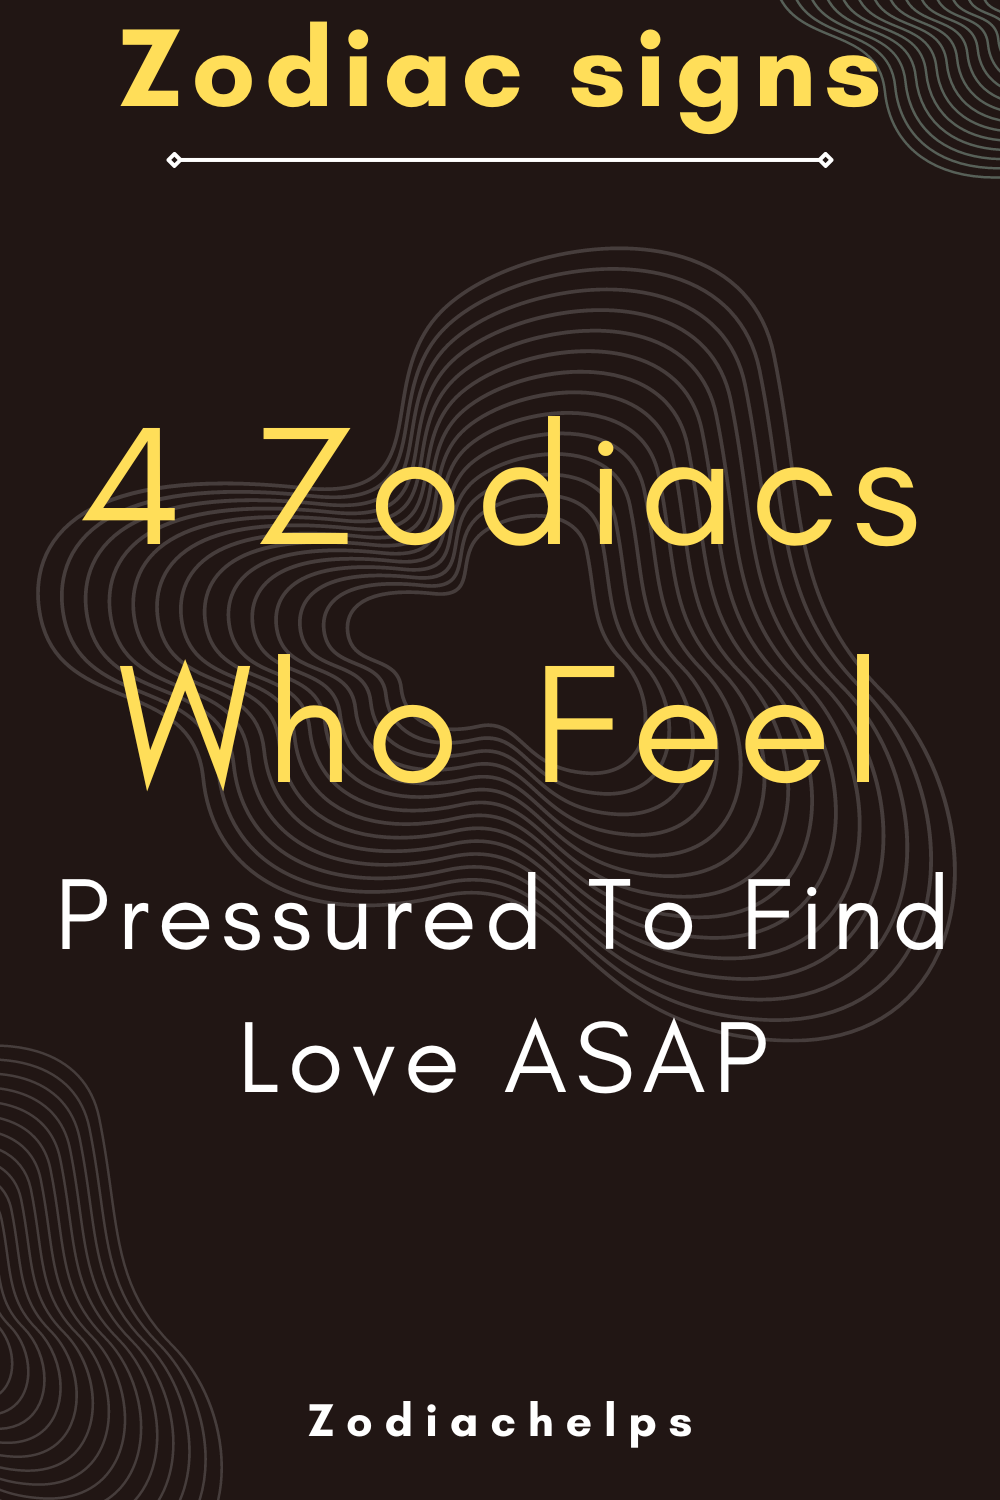 4 Zodiacs Who Feel Pressured To Find Love ASAP